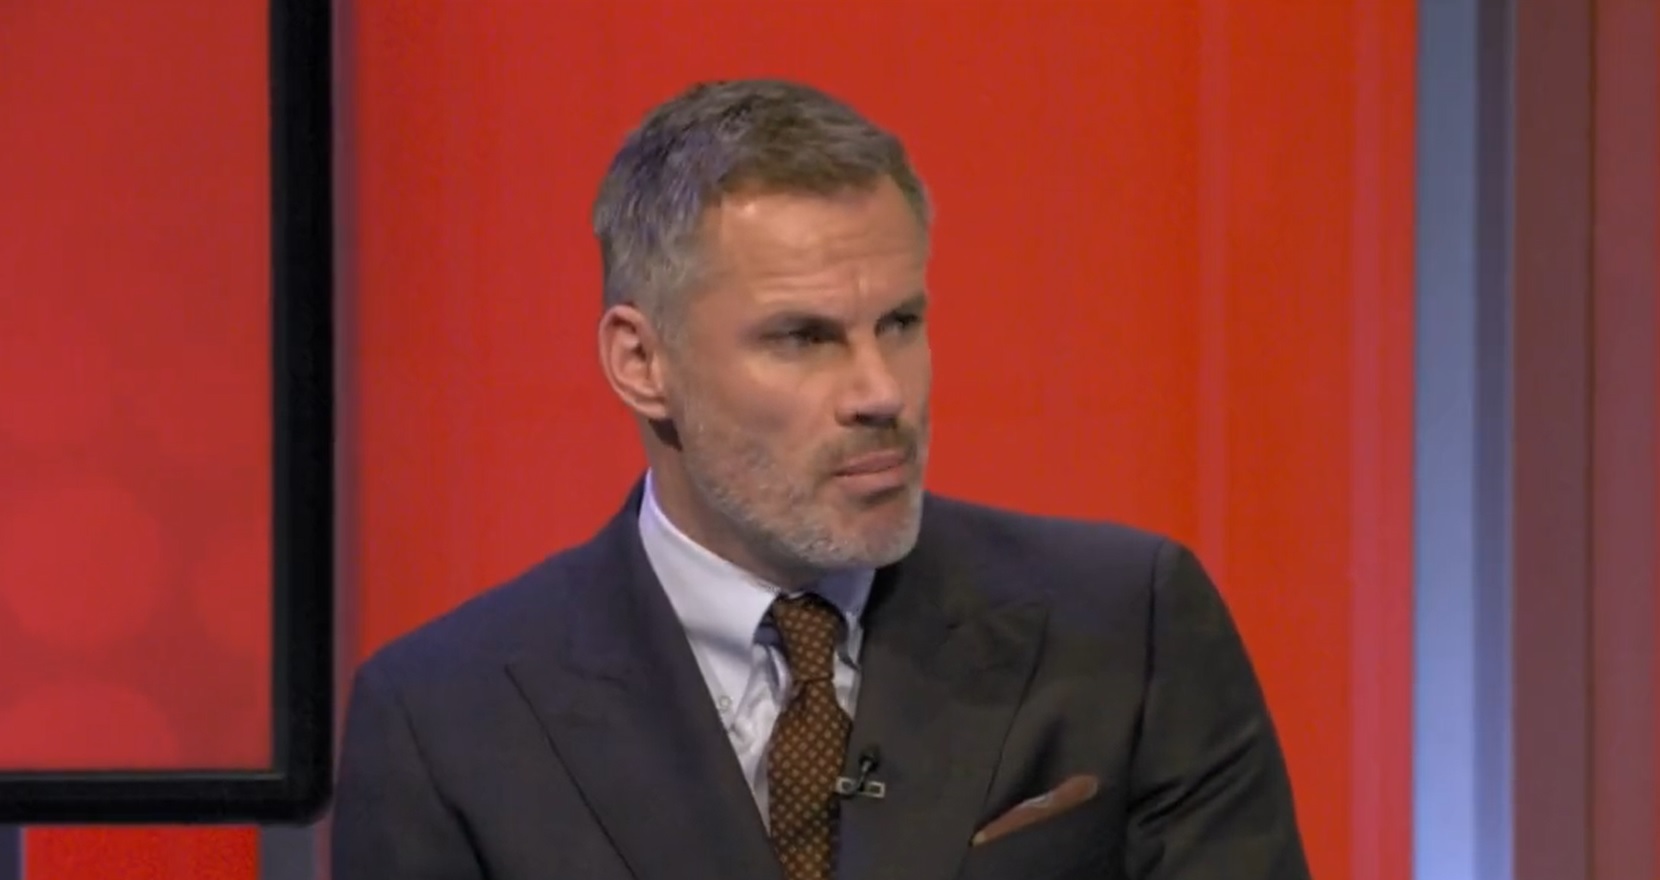 (Video) Carragher fires stark warning shot at FSG over Mo Salah contract the Liverpool owners can’t afford to ignore